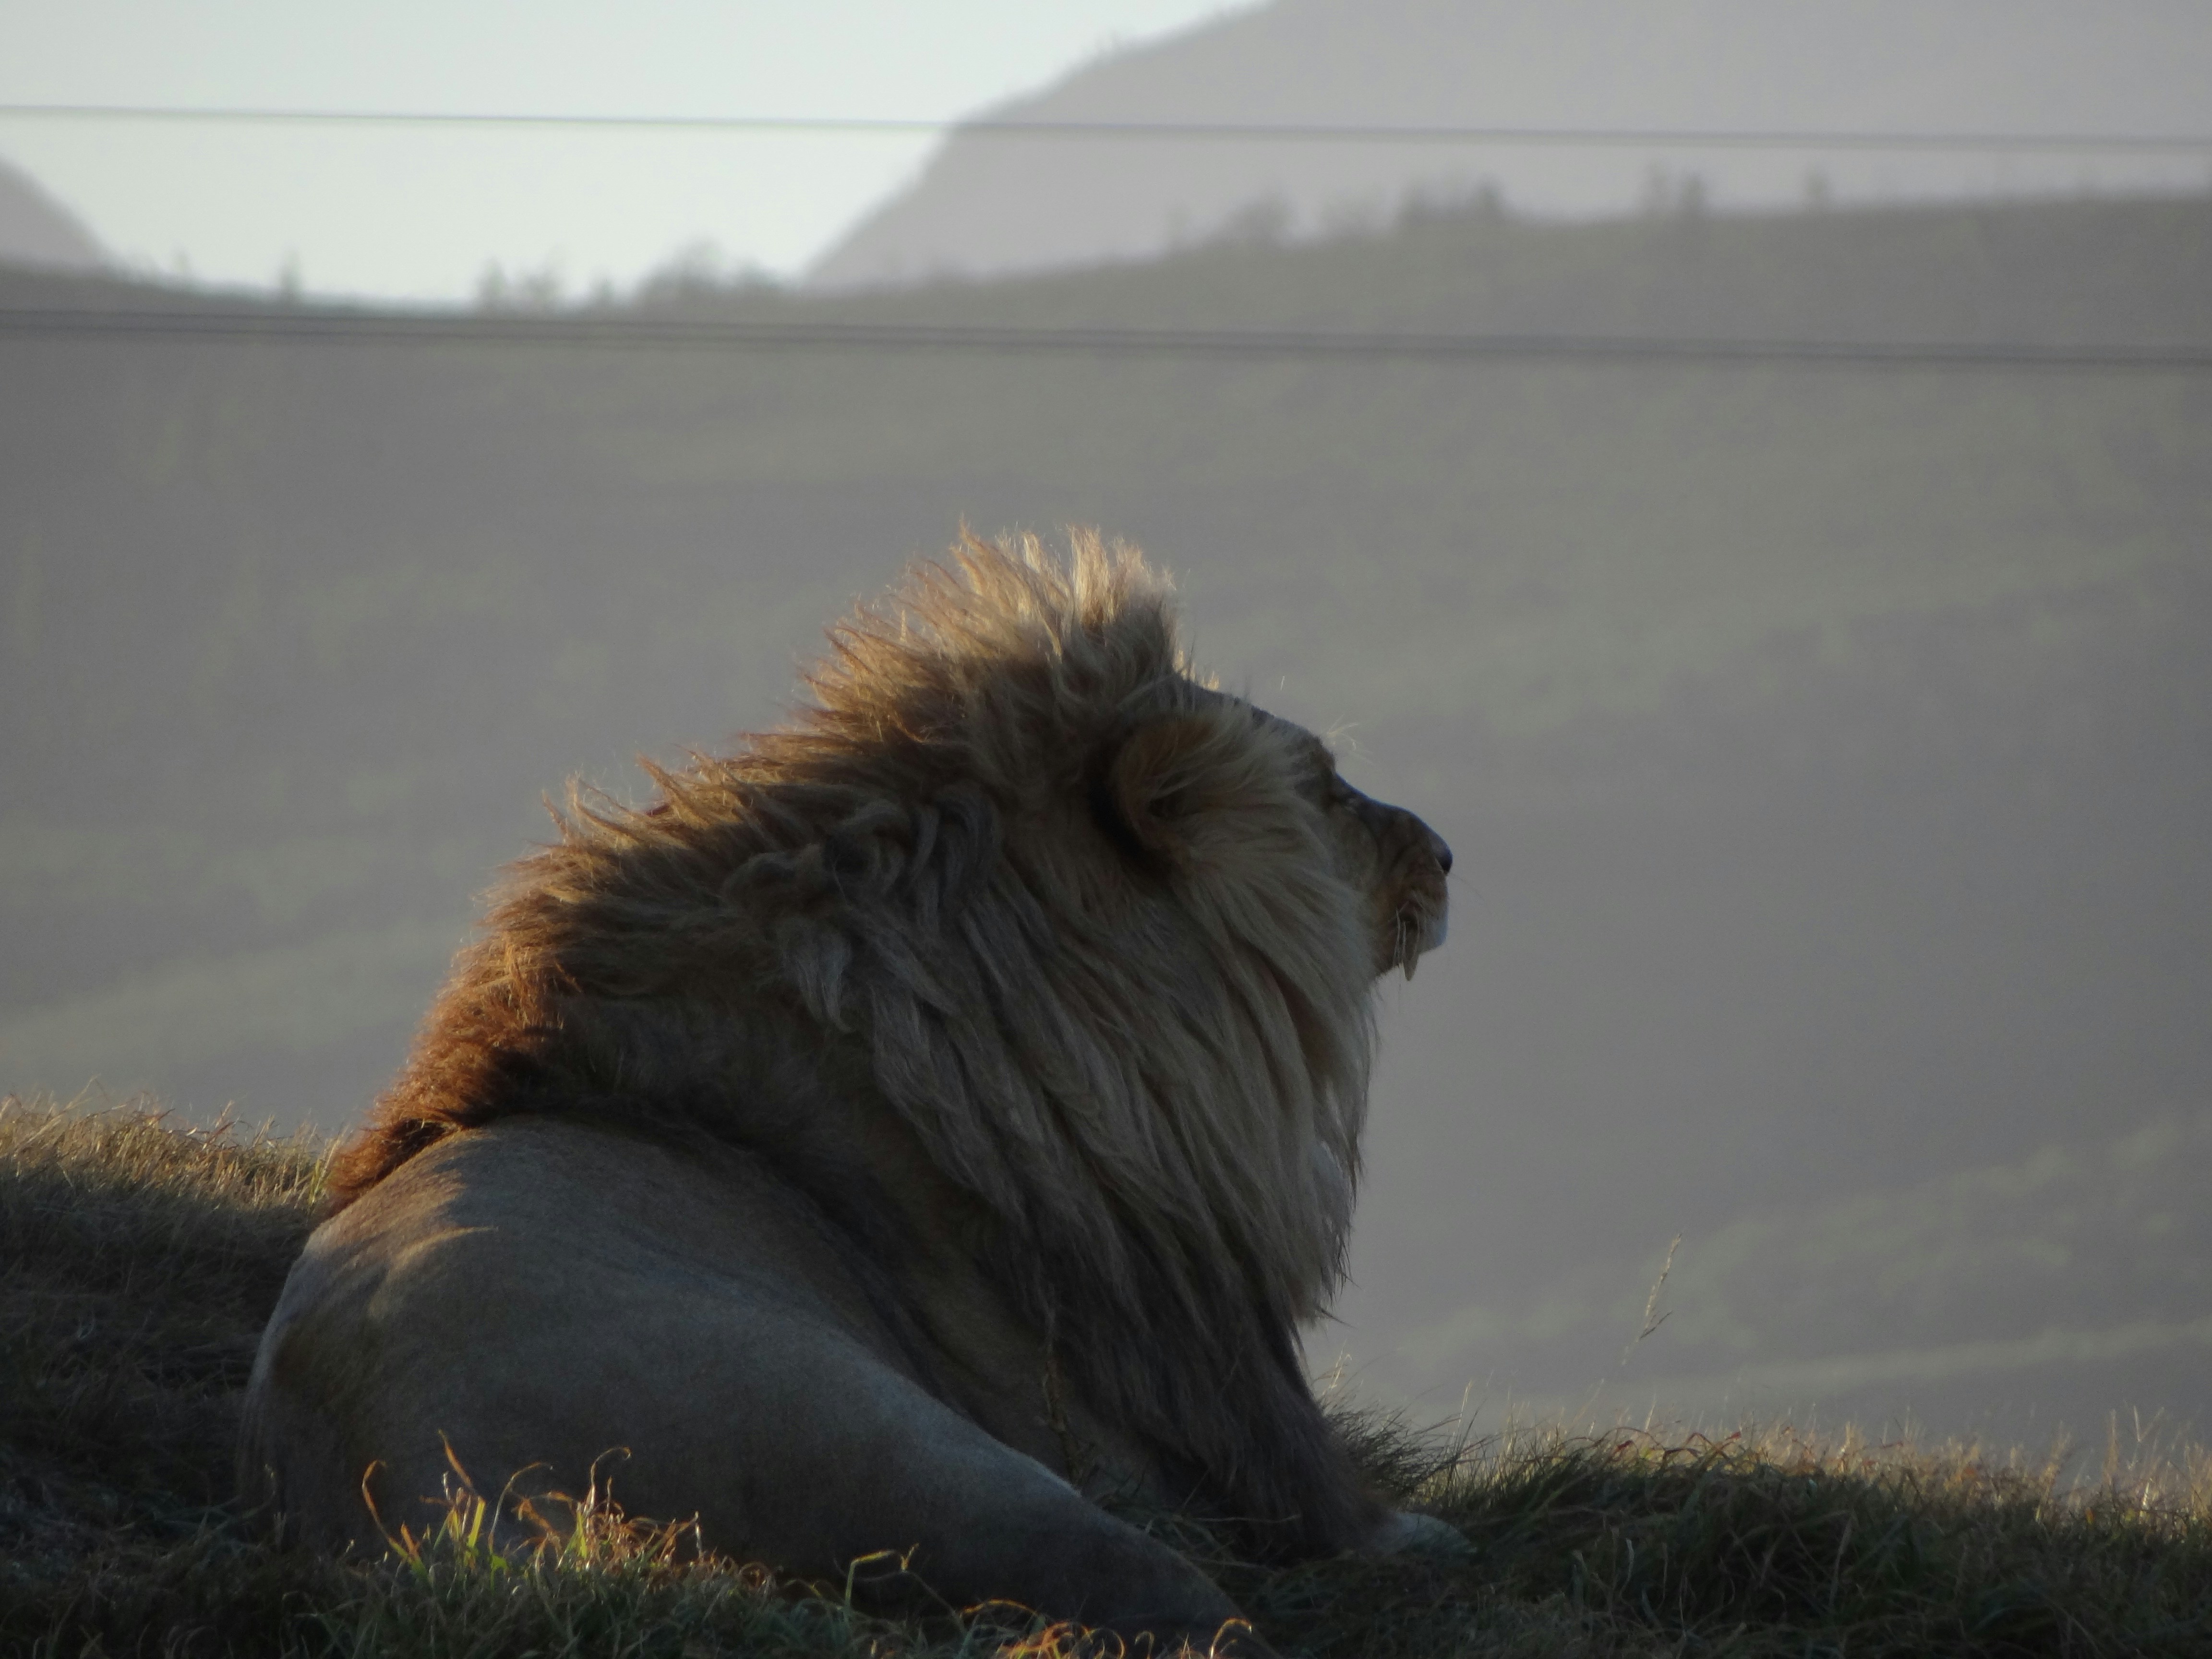 The king of the jungle deserves the most well-composed, high-quality images possible. And that's what you'll find in Unsplash's curated selection of lion images: magnificent and perfectly-executed photos that capture the lion's power. Always free on Unsplash.